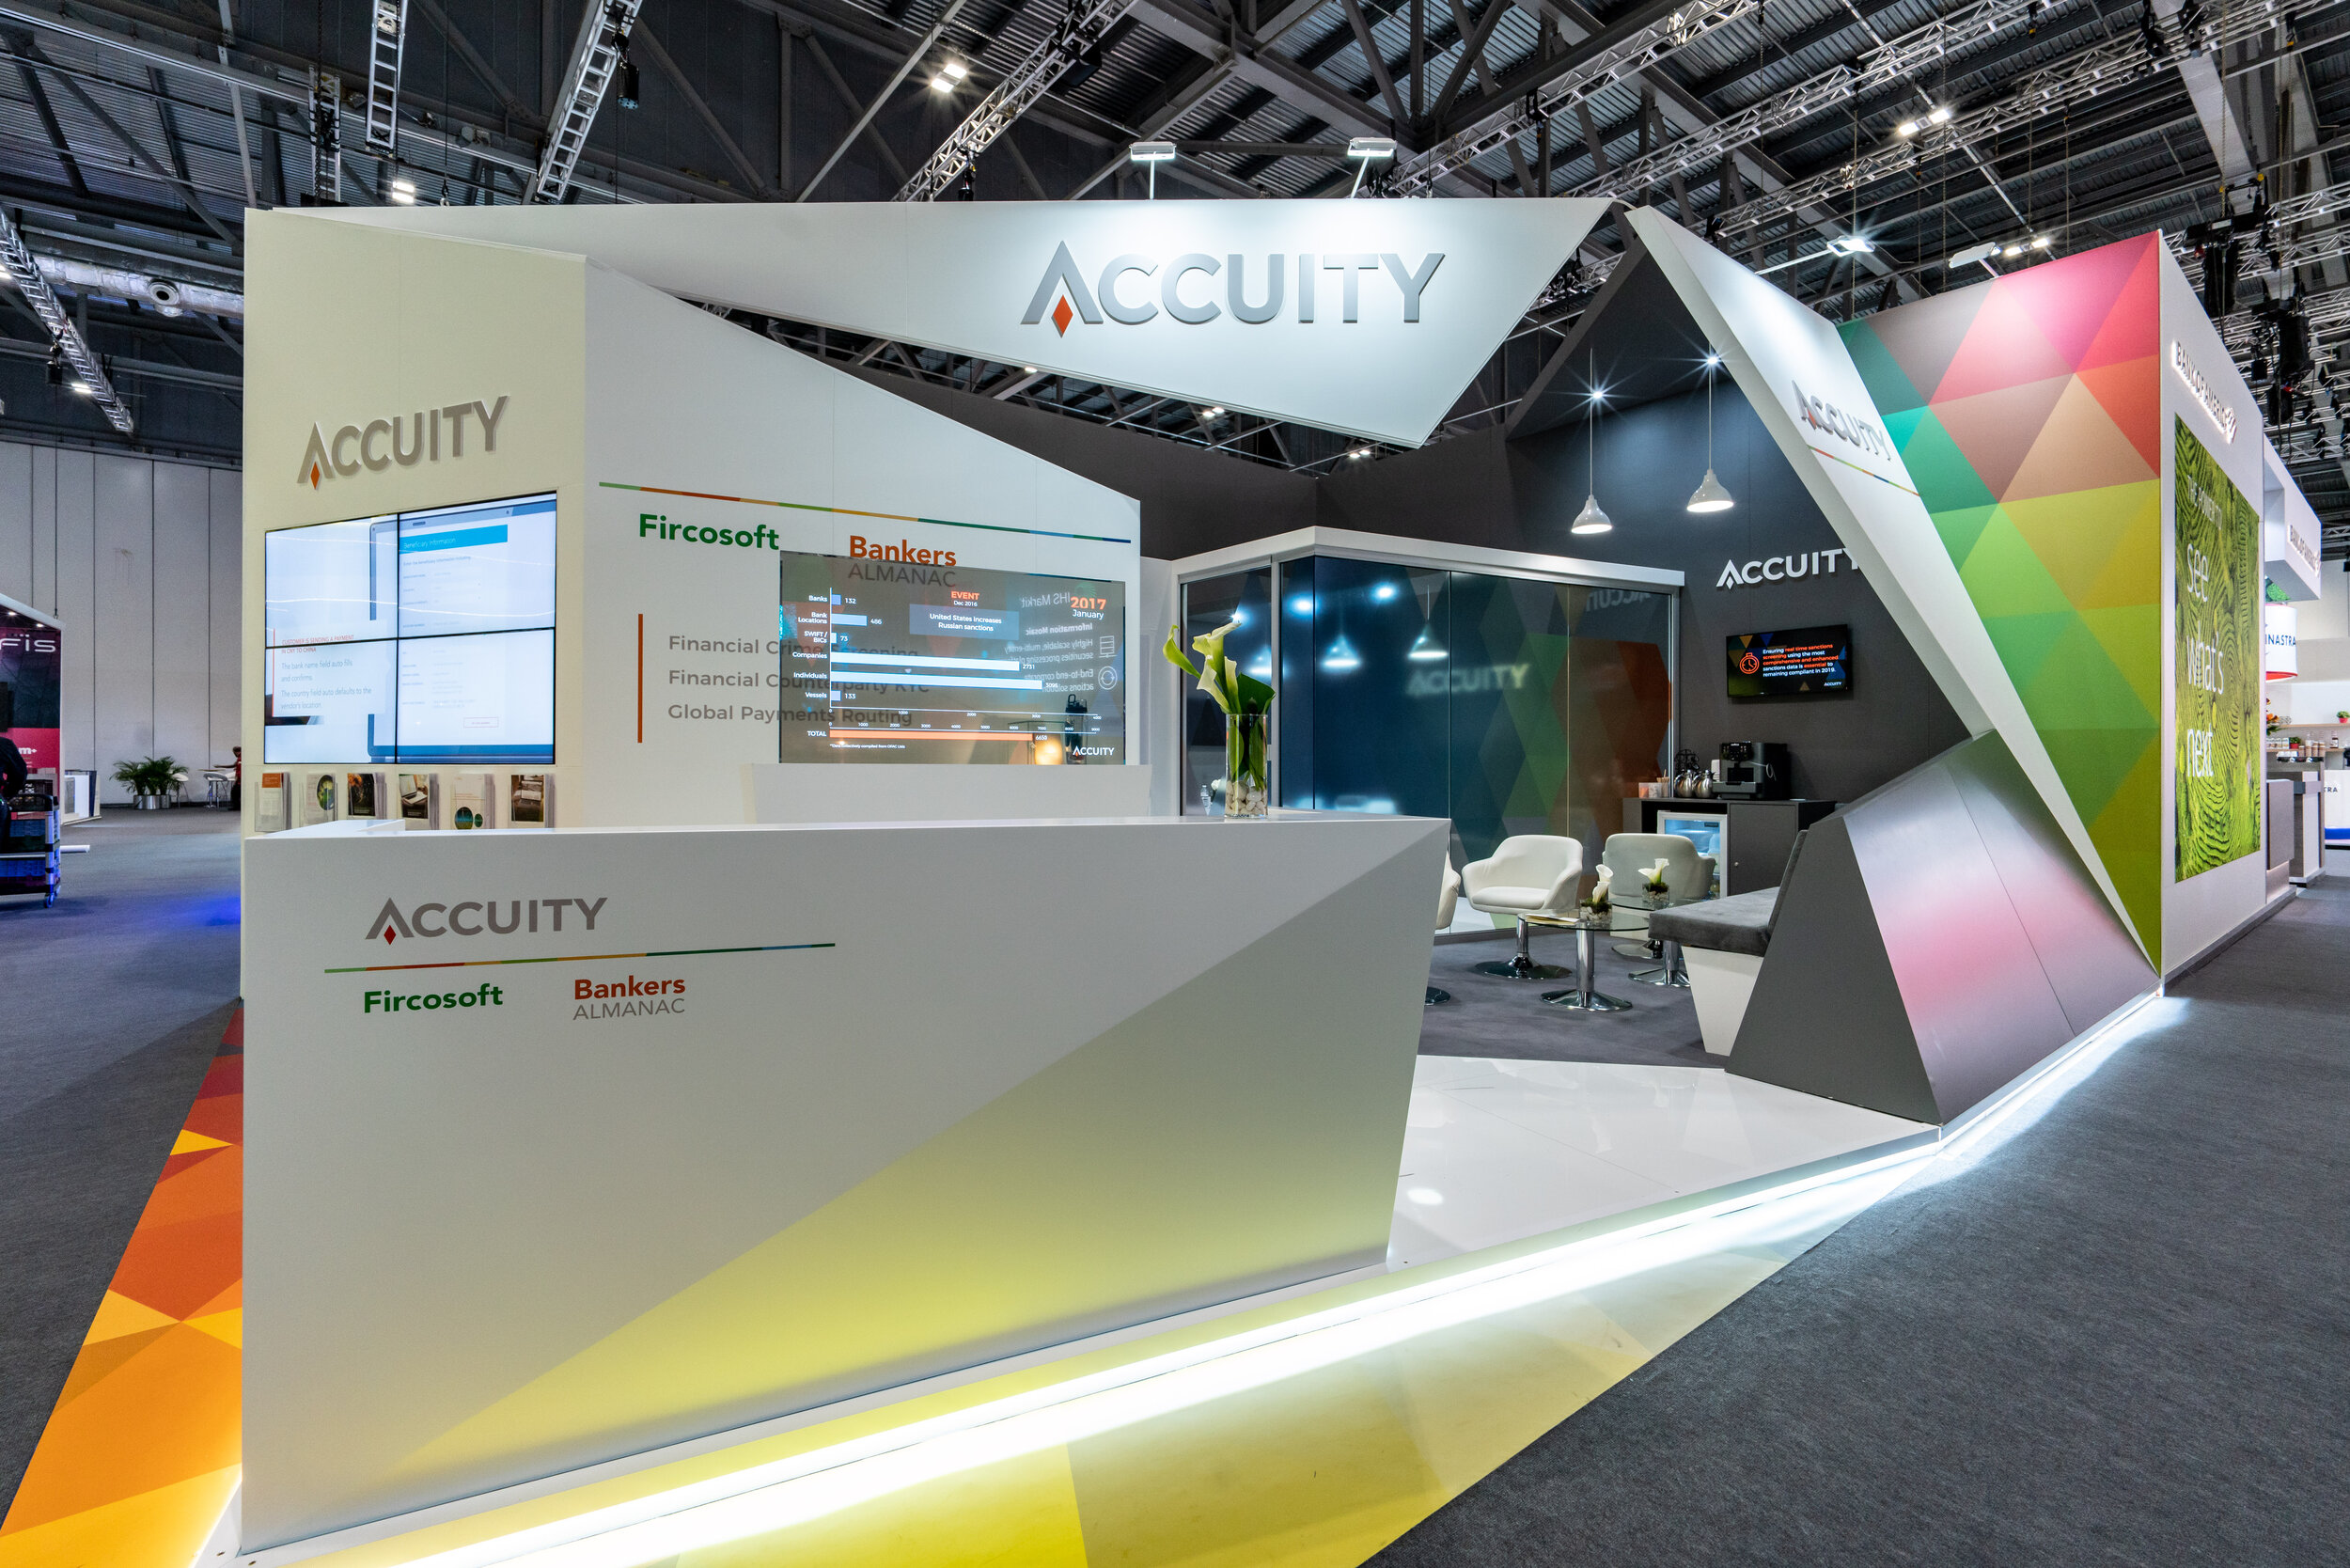  Accuity at Sibos, London. 48m2. 